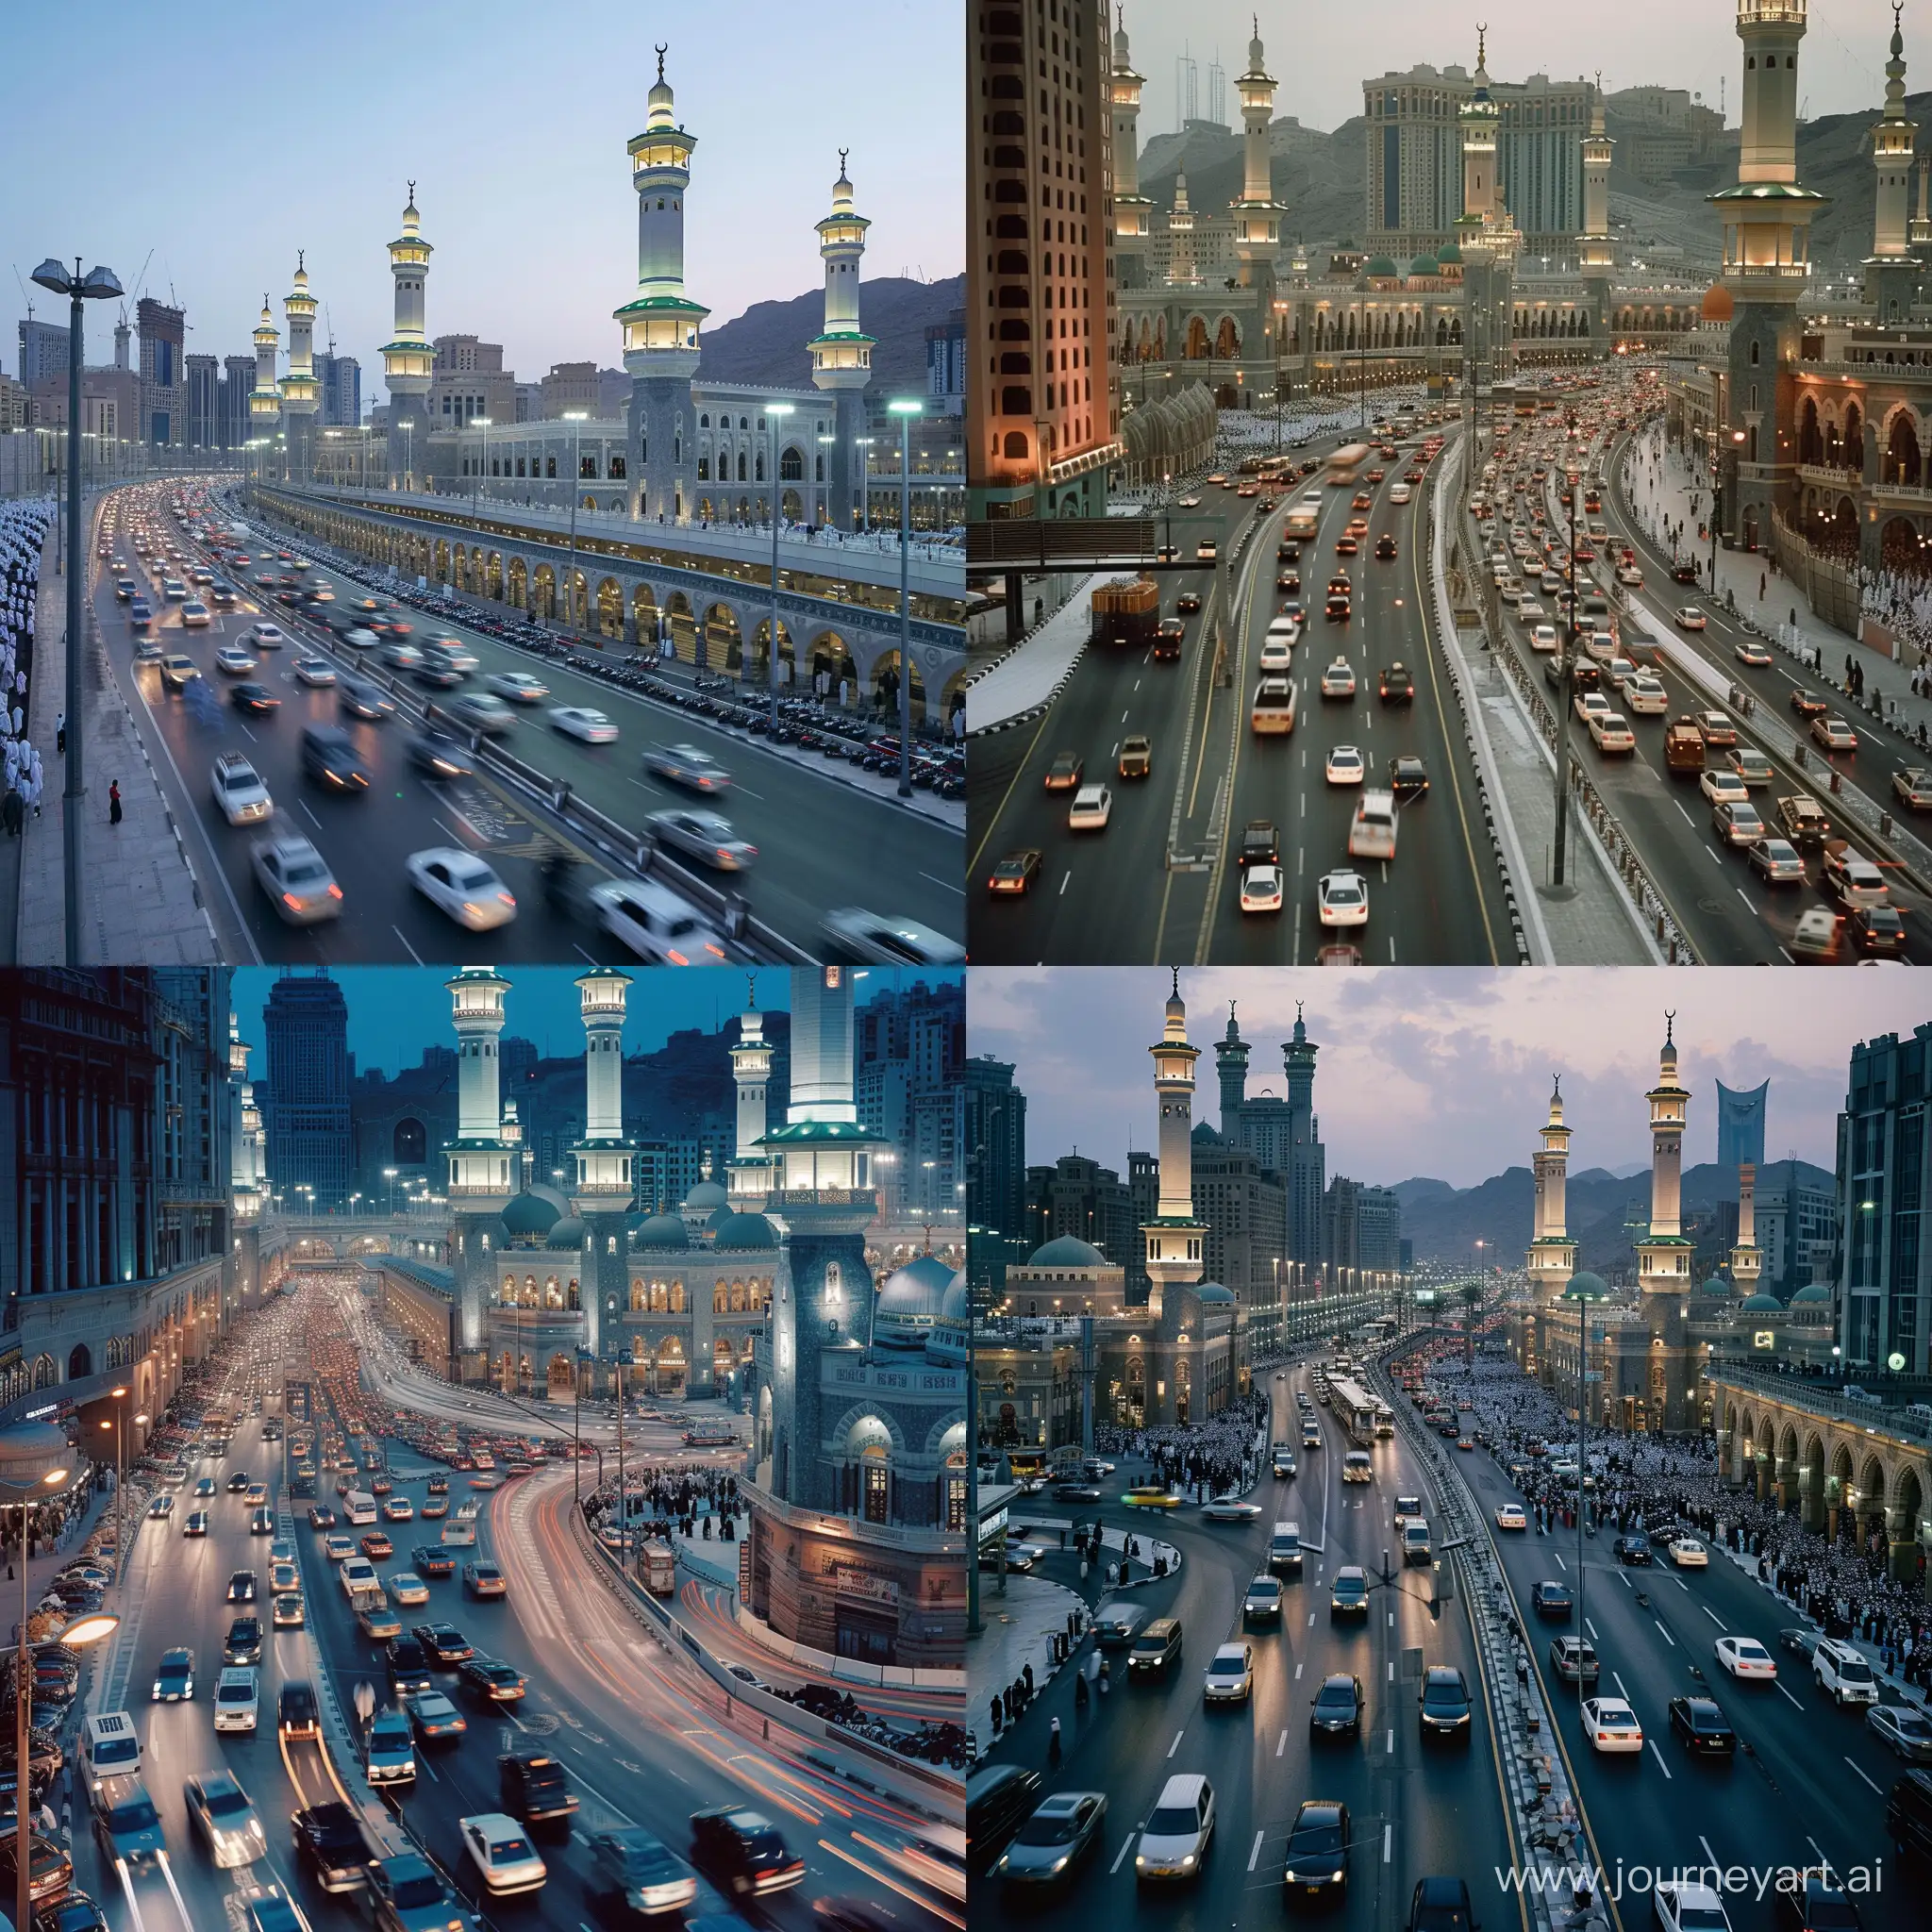 Busy-Traffic-Intersection-Surrounded-by-Mecca-Mosque-Architecture